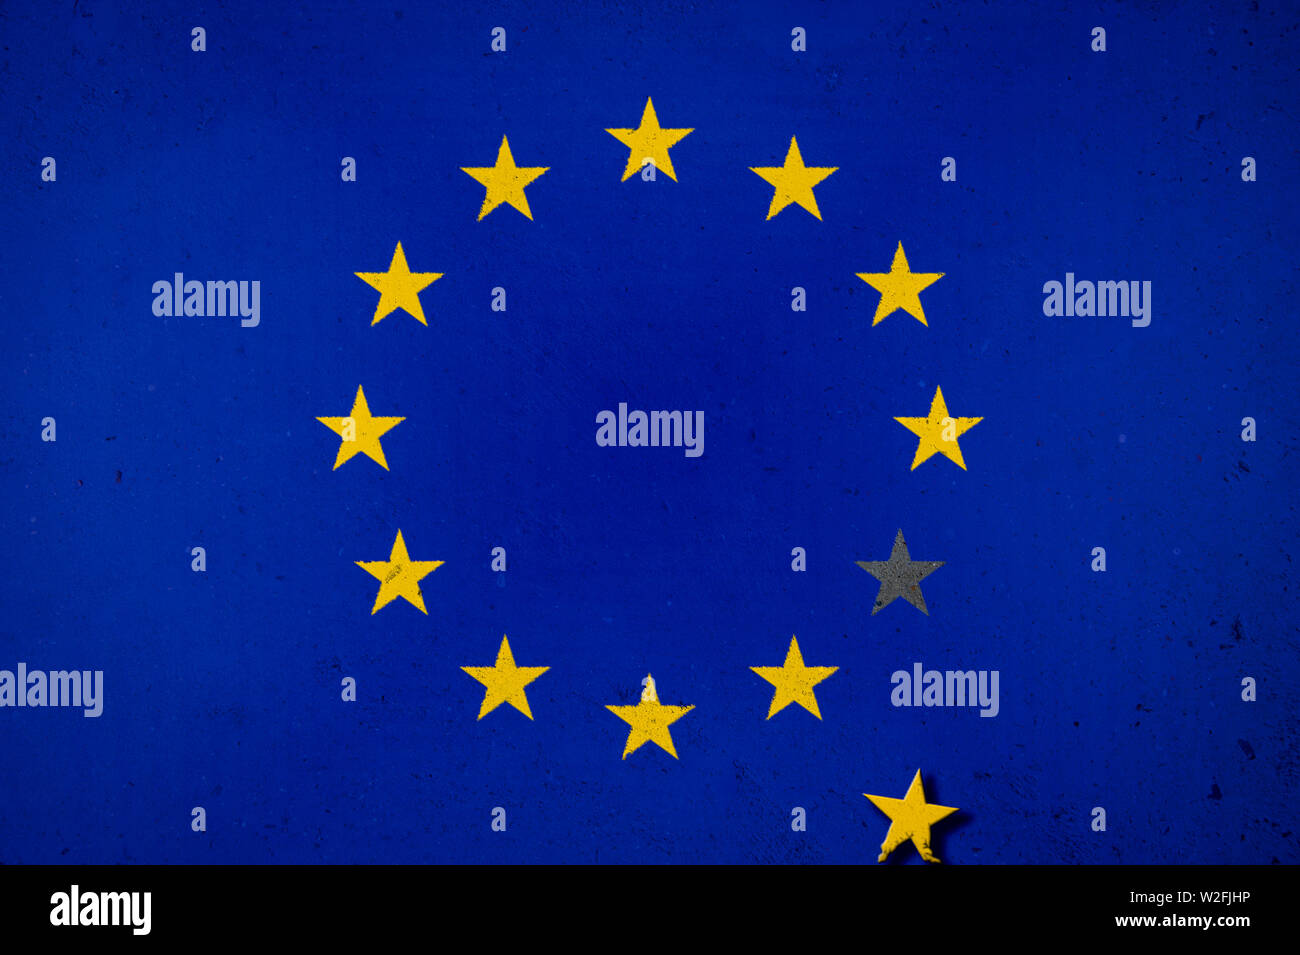 Grunge EU European Union flag with single fallen star lost to Brexit on textured concrete wall background Stock Photo